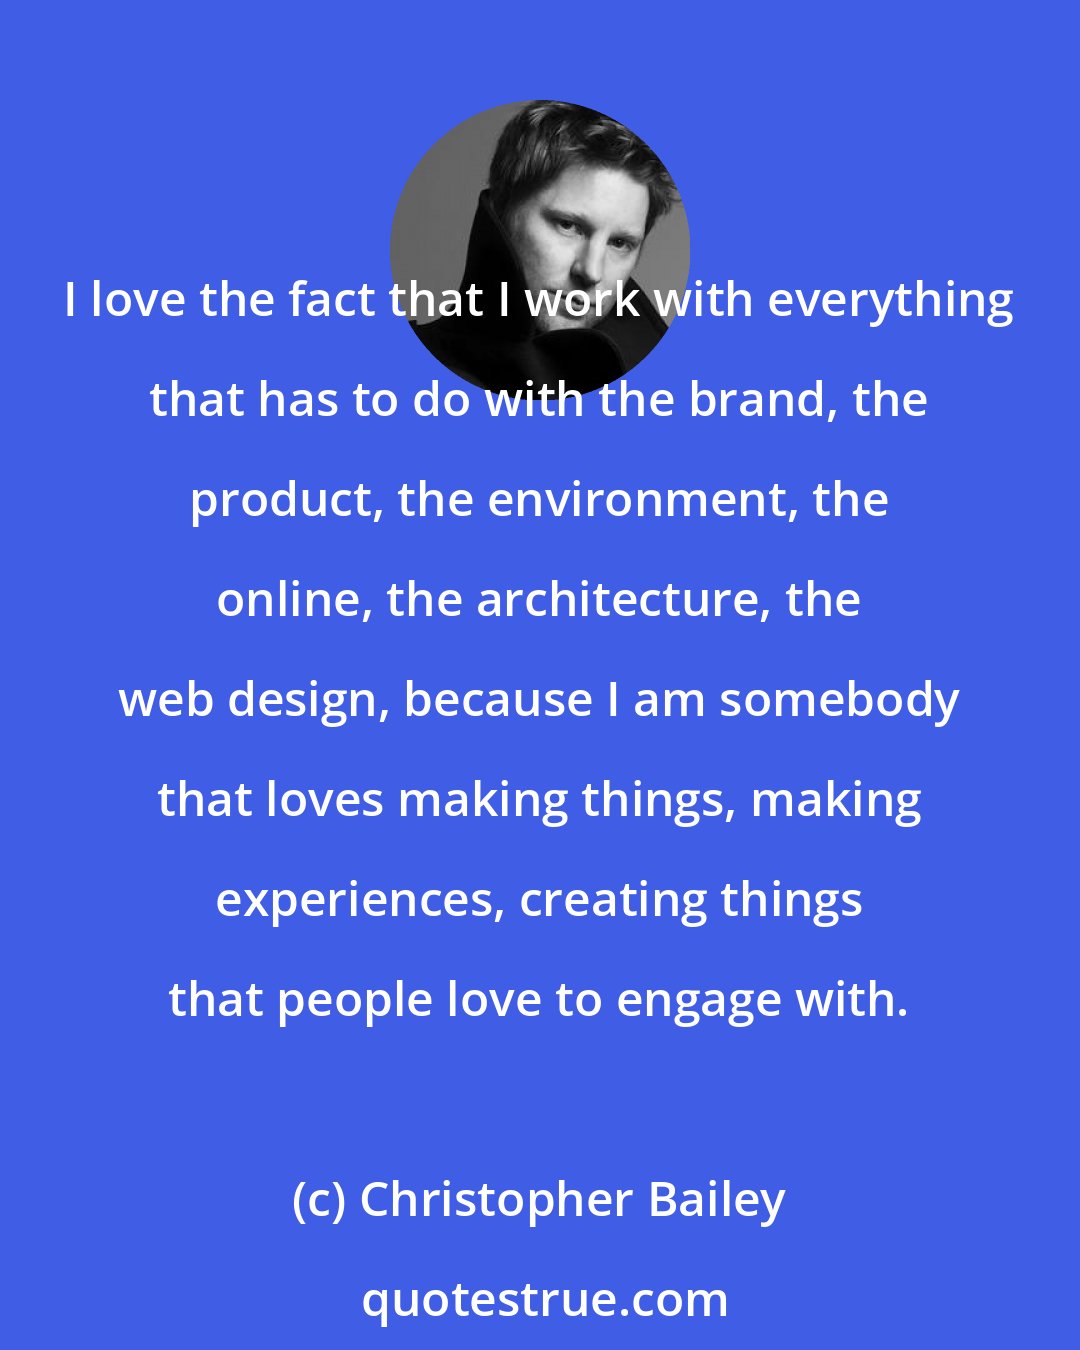 Christopher Bailey: I love the fact that I work with everything that has to do with the brand, the product, the environment, the online, the architecture, the web design, because I am somebody that loves making things, making experiences, creating things that people love to engage with.